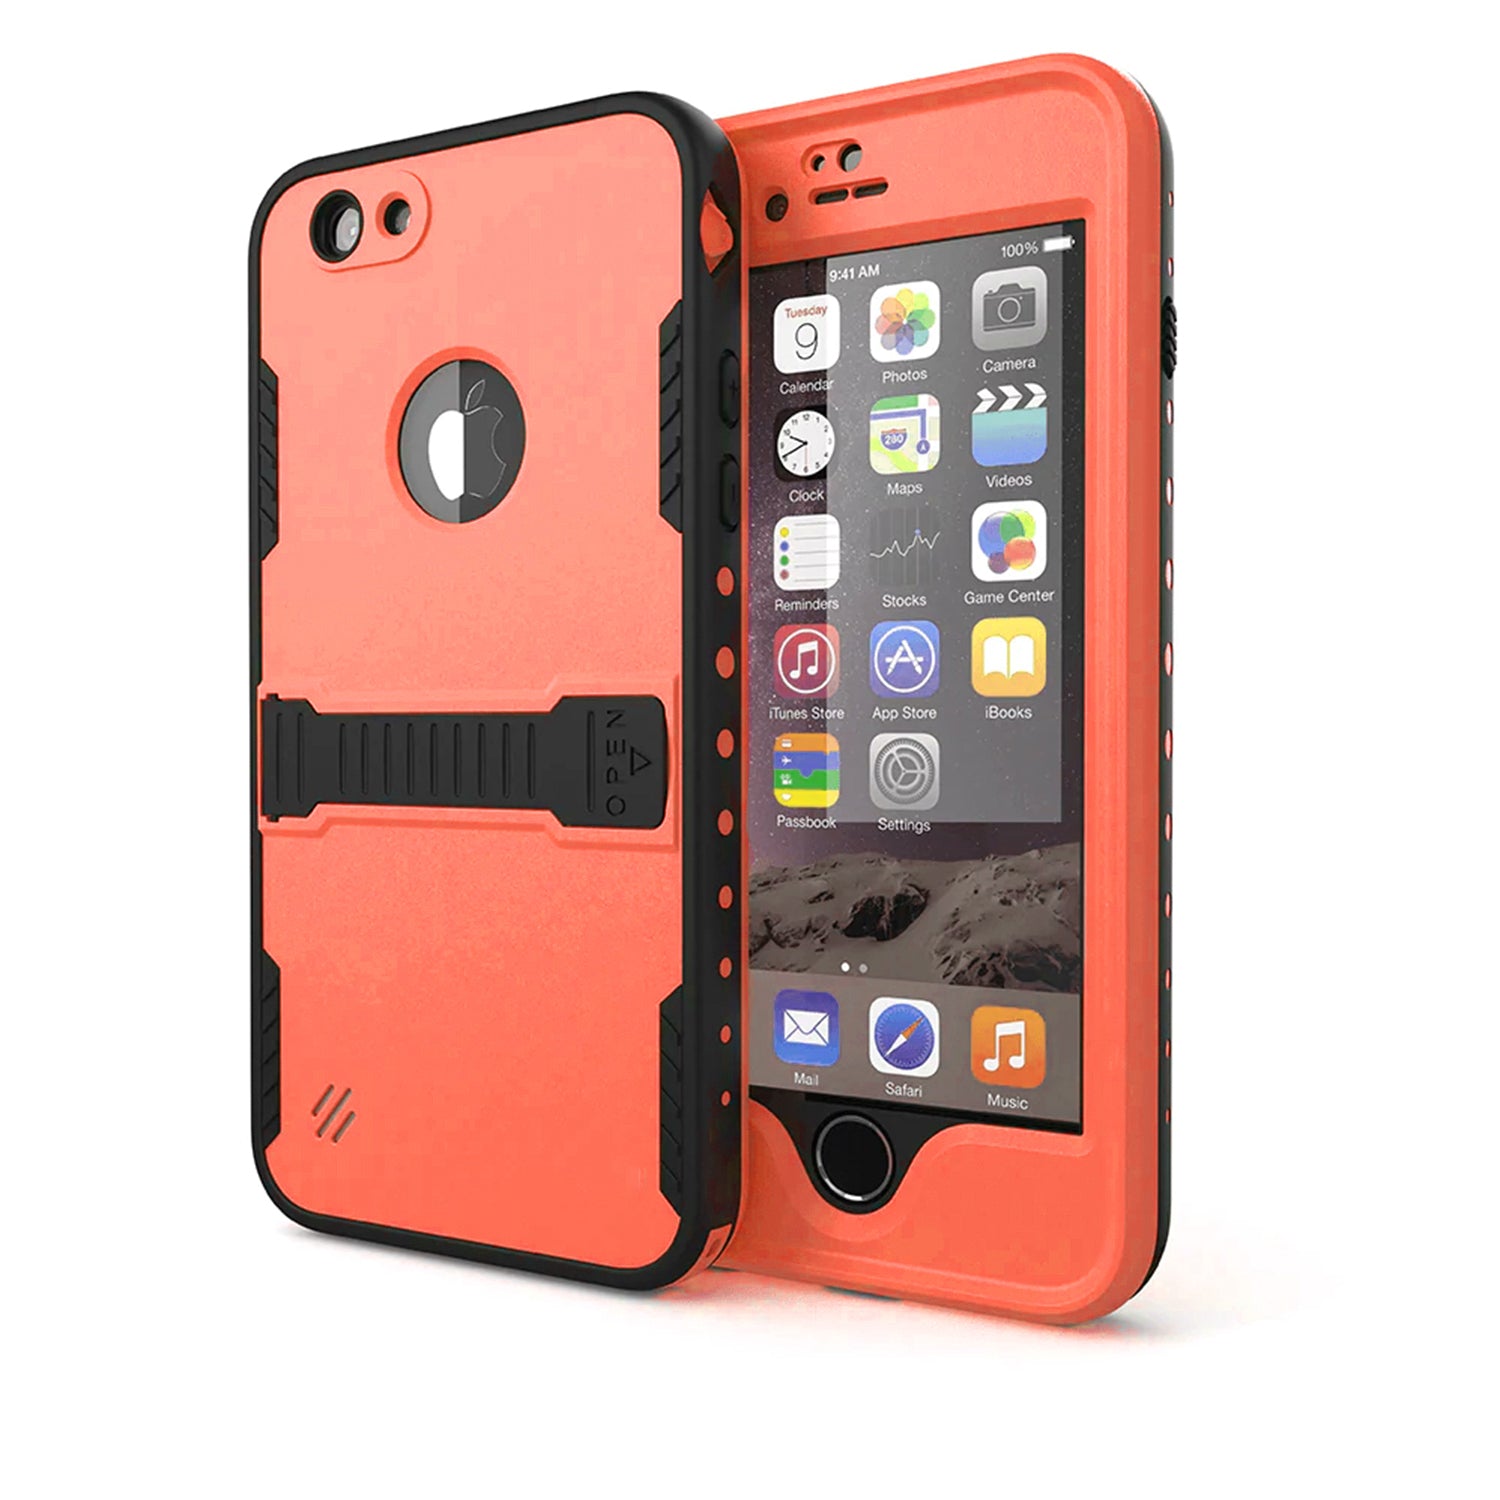 Kickstand Red Pepper Waterproof Case for iPhone 6 Plus(5.5in)